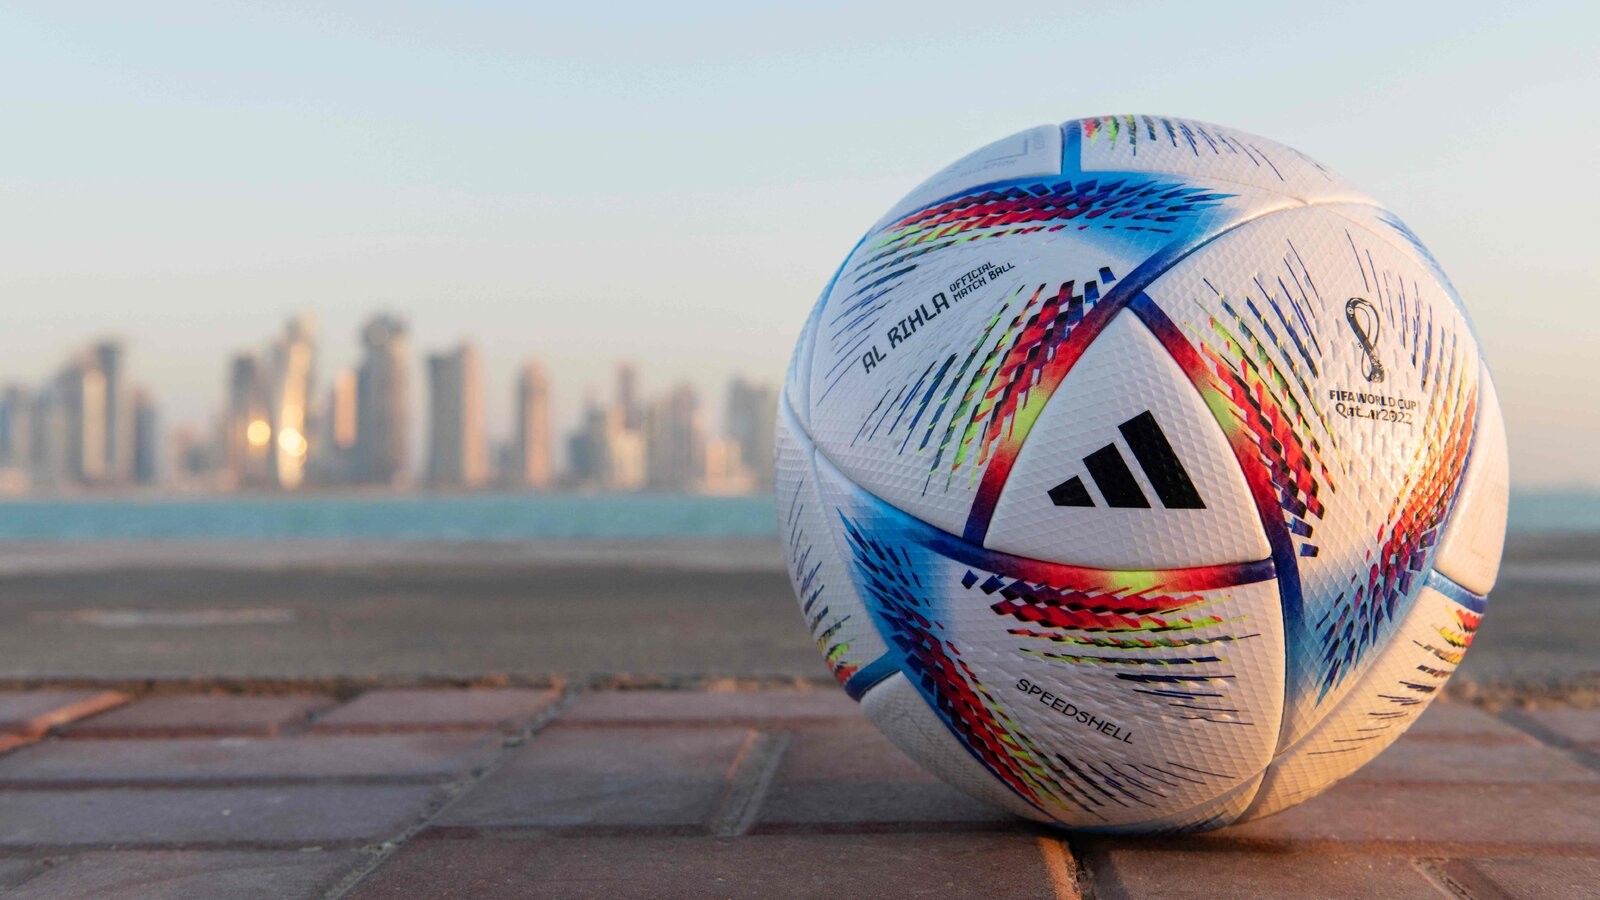 How To Watch World Cup 2022 In Kuwait - Full Schedule in Kuwait Time & Date